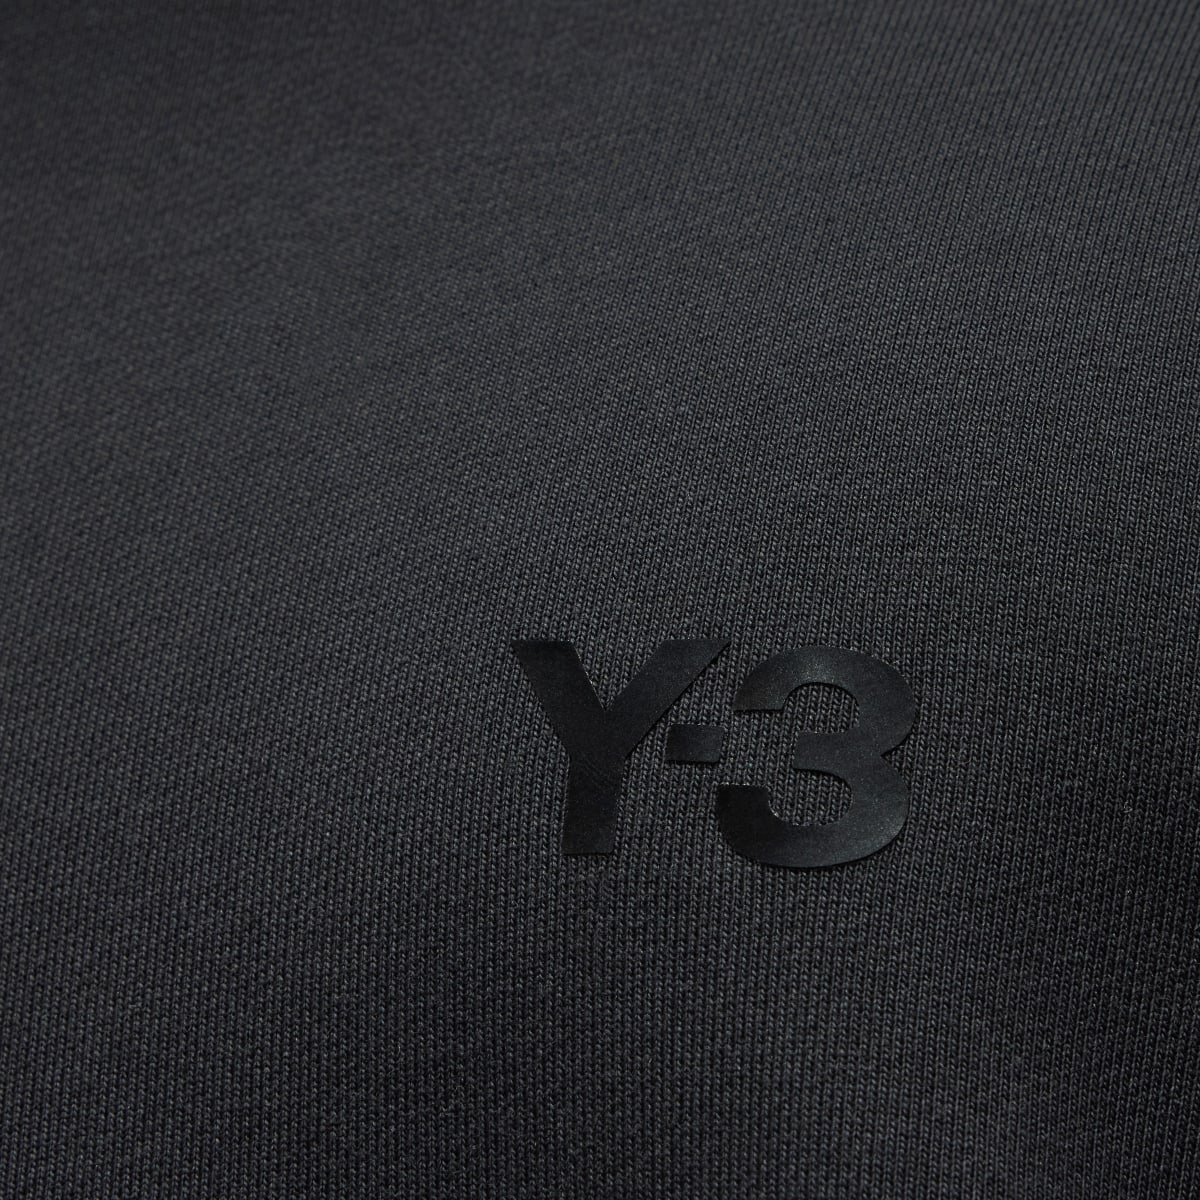 Adidas Y-3 French Terry Crew Sweater. 7